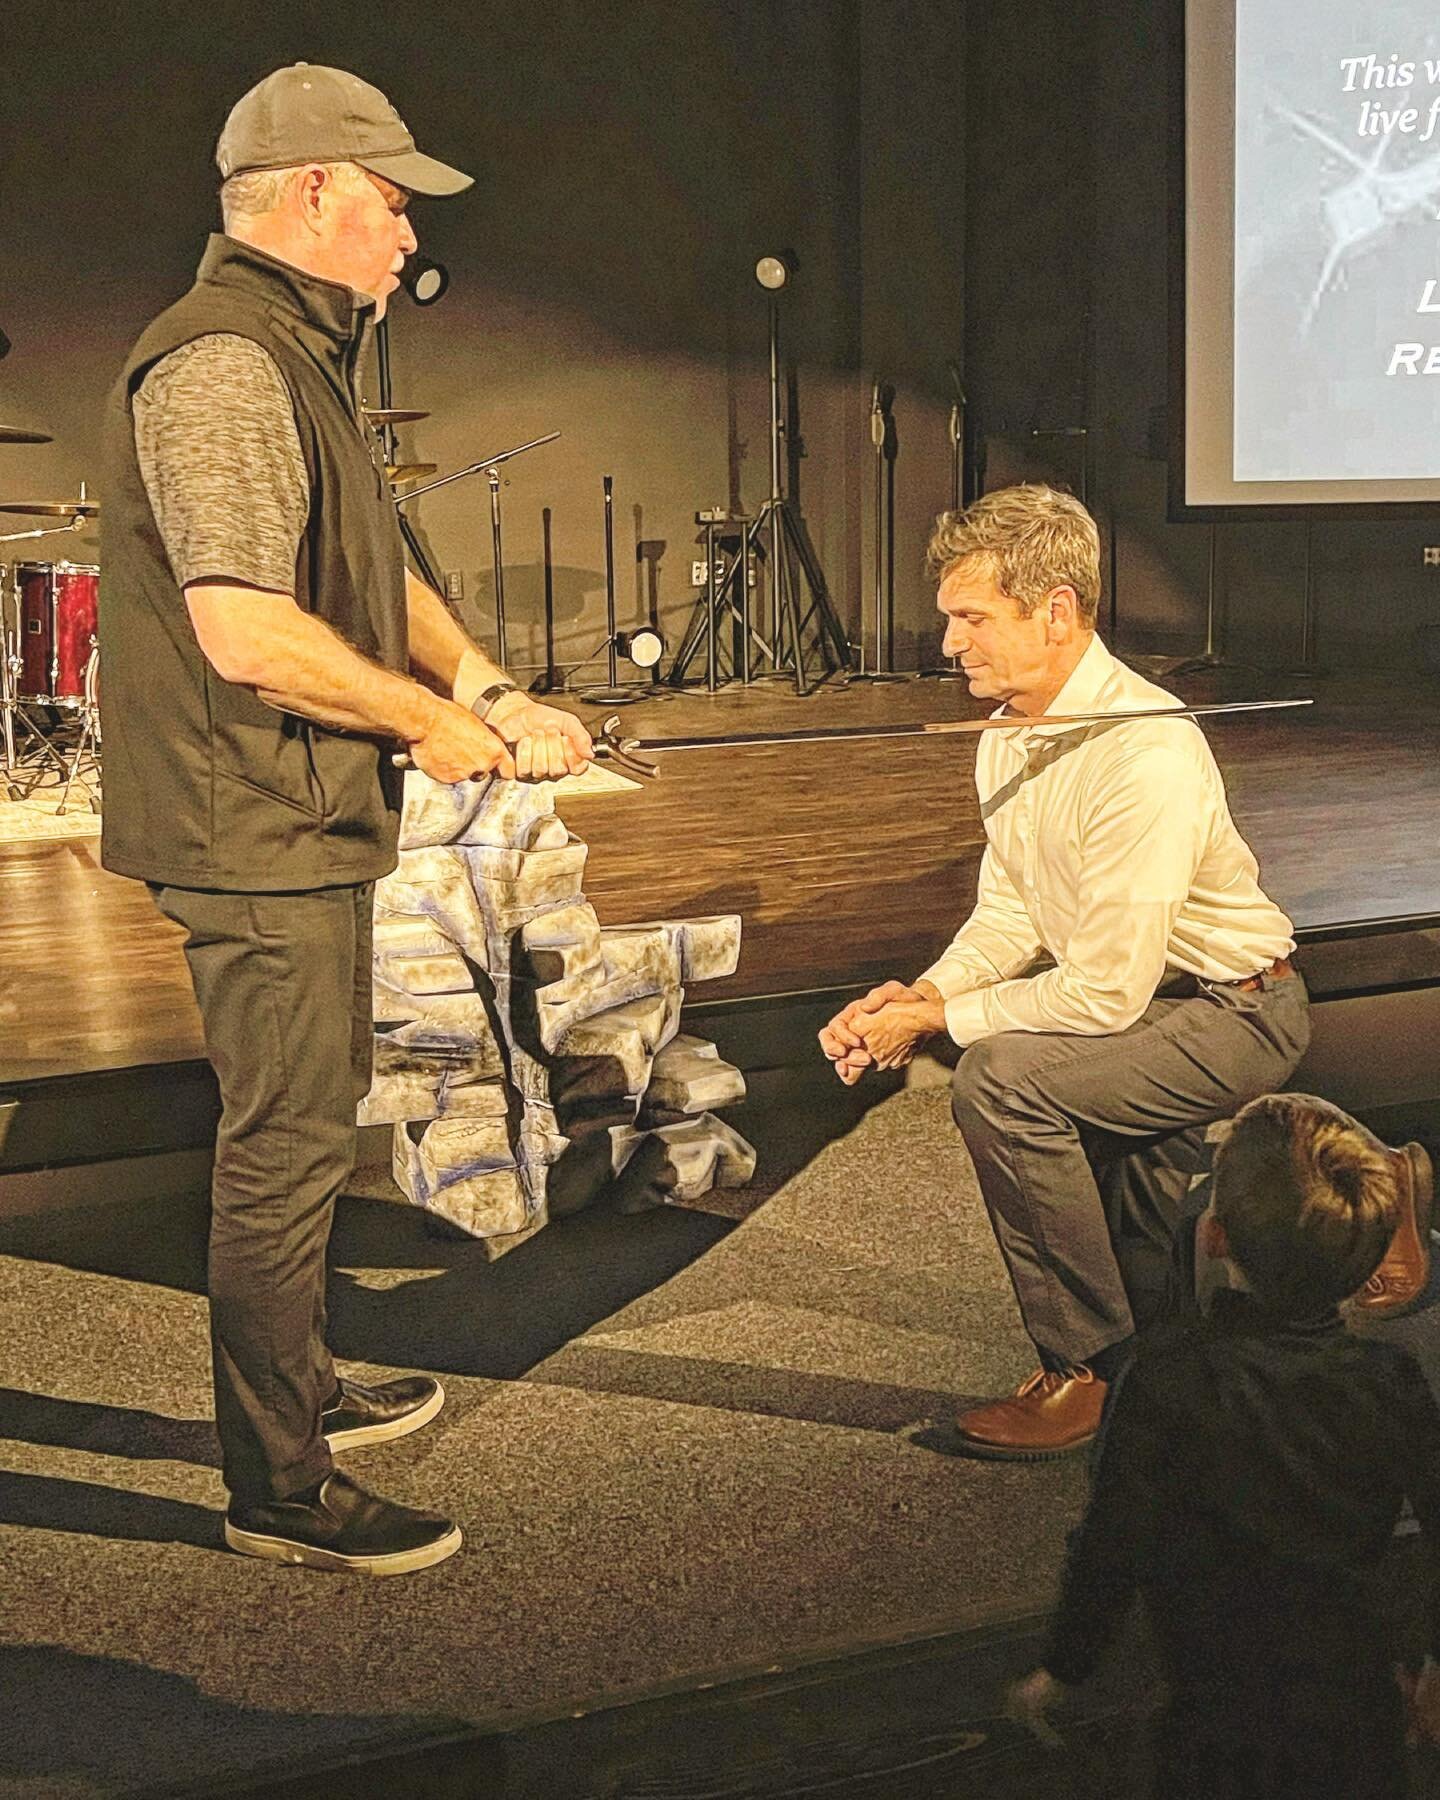 Completed the Quest for Authentic Manhood course. It was 6 months of unpacking my past and mapping a clear vision for my future.  Jace got to witness the &ldquo;Knighting&rdquo; ceremony.  Very encouraging!